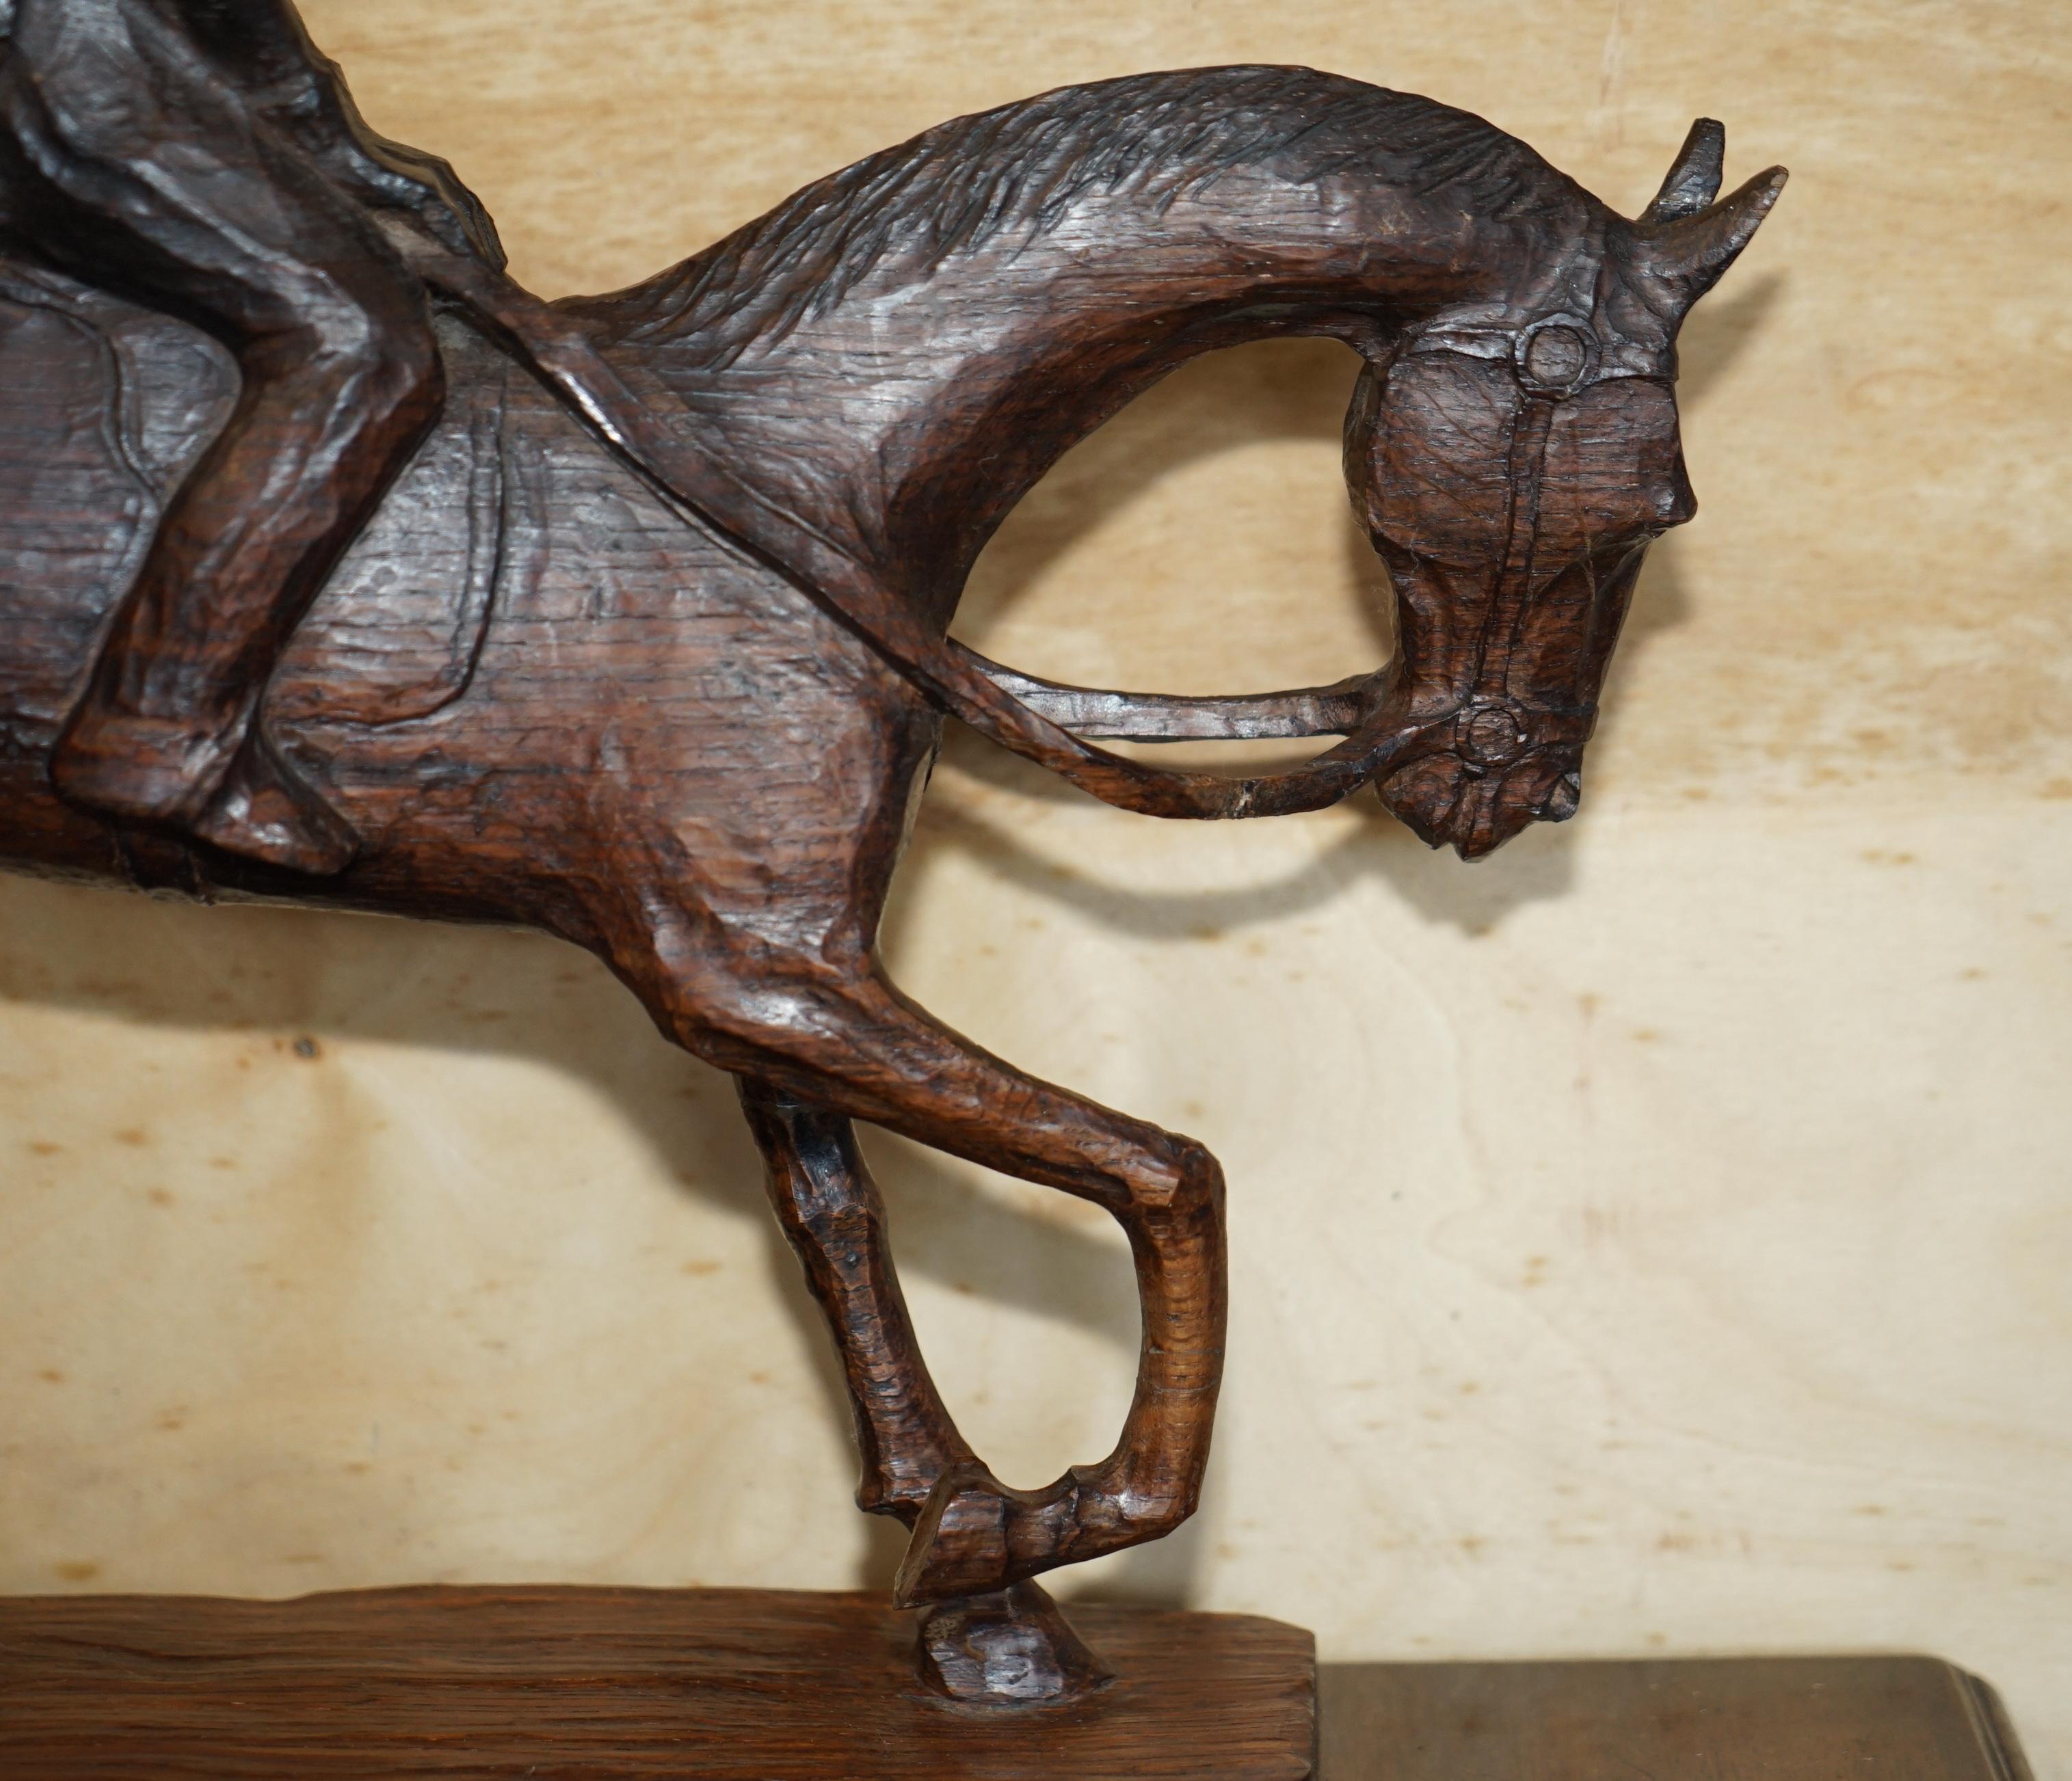 19th Century HAND CARVED SIGNED WAKMASKI 80 LARGE WOOD STATUE OF SOLDIER ON A HORSE VERY FiNE For Sale